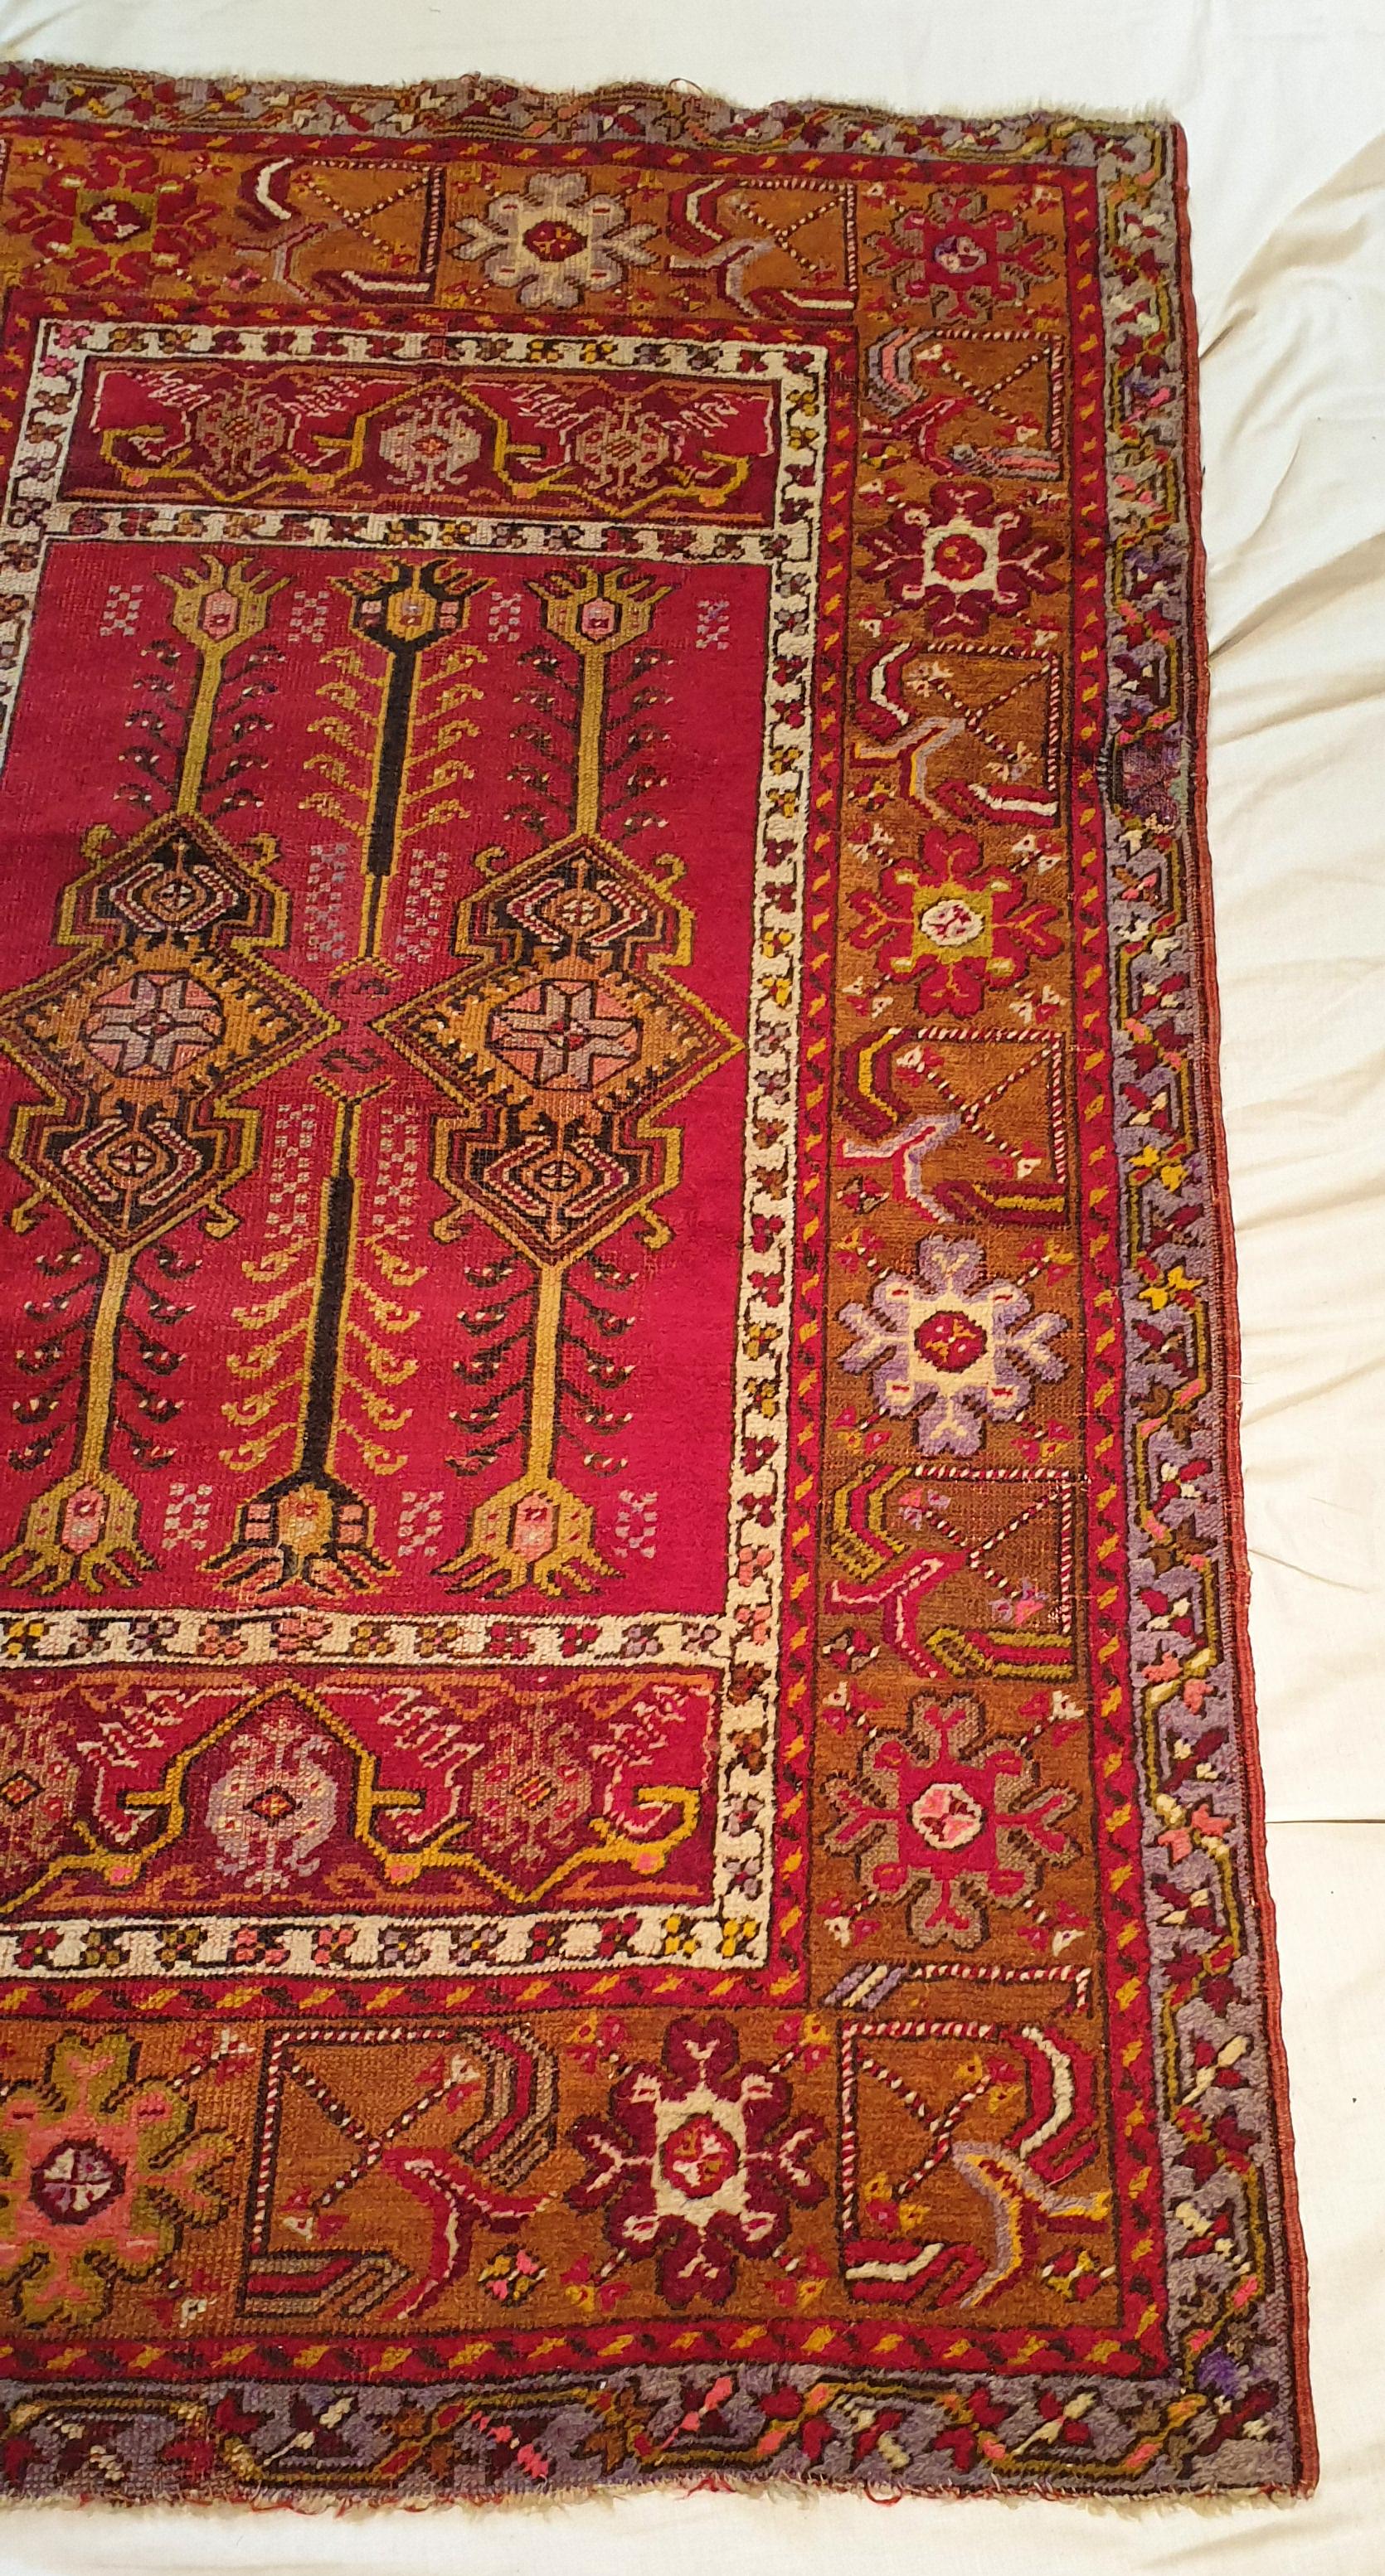 Hand-Knotted  Kirchir Turkish Carpet, 19th Century - N° 728 For Sale